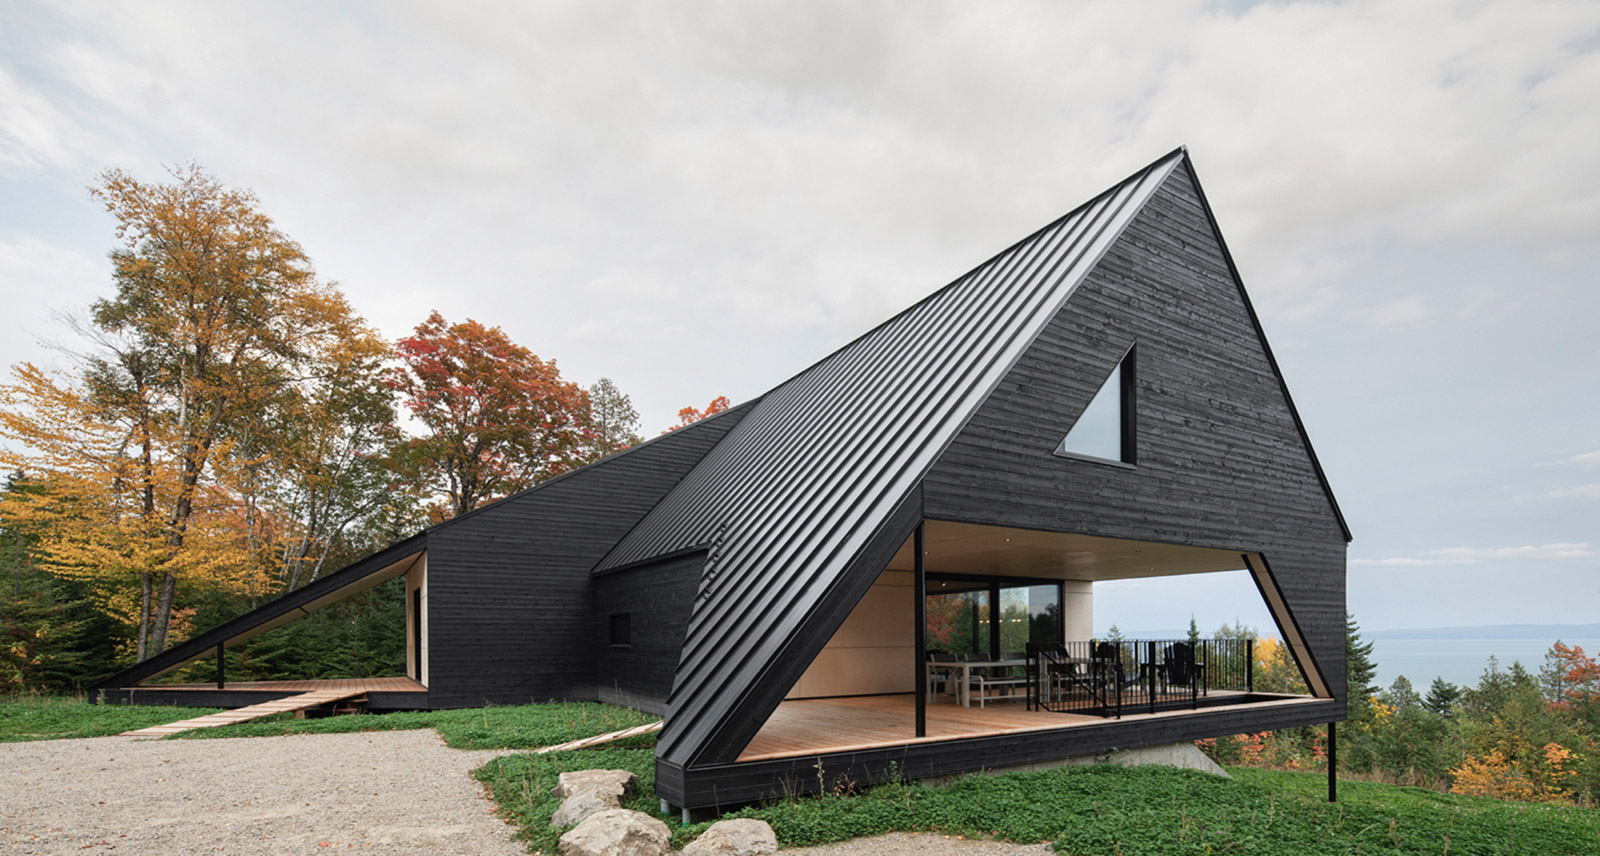 Get Cozy in Quebec with BMW and This Rental Cabin Inspired By Naval Architecture